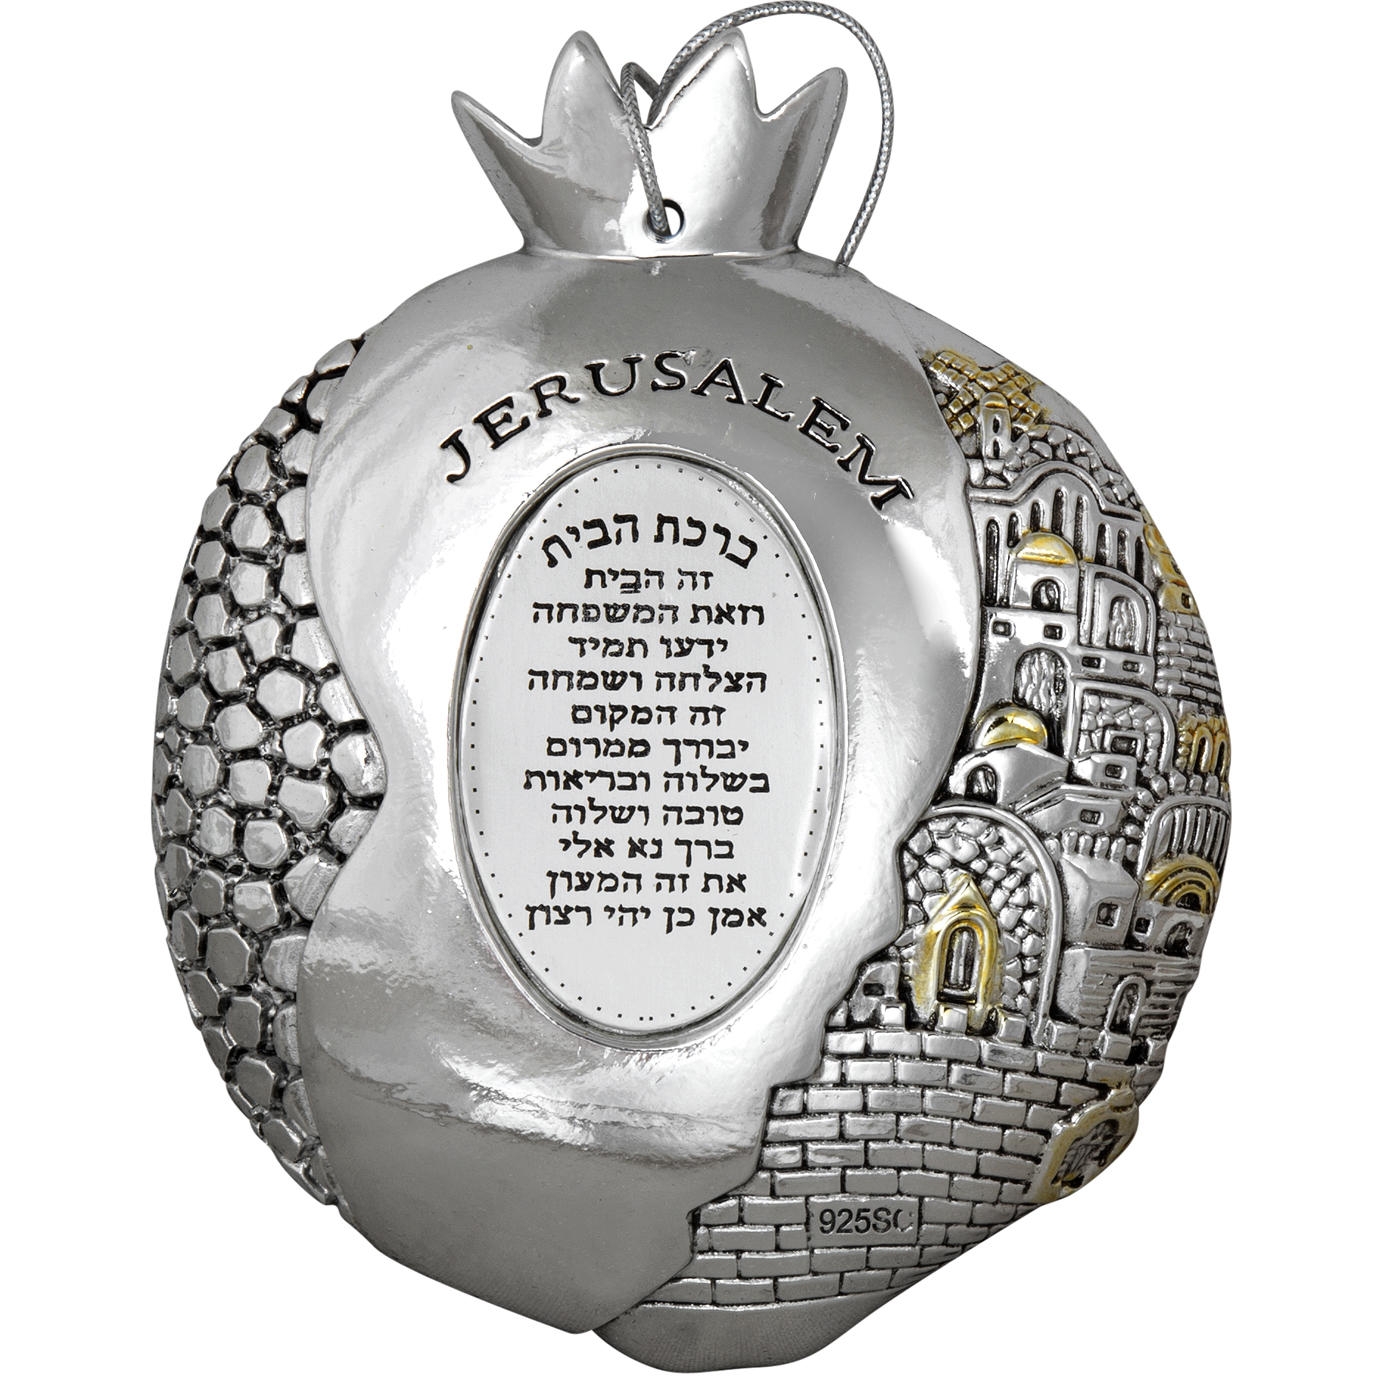 Silver Plated Pomegranate Home Blessing Wall Hanging with Seeds and Jerusalem Motif - 1